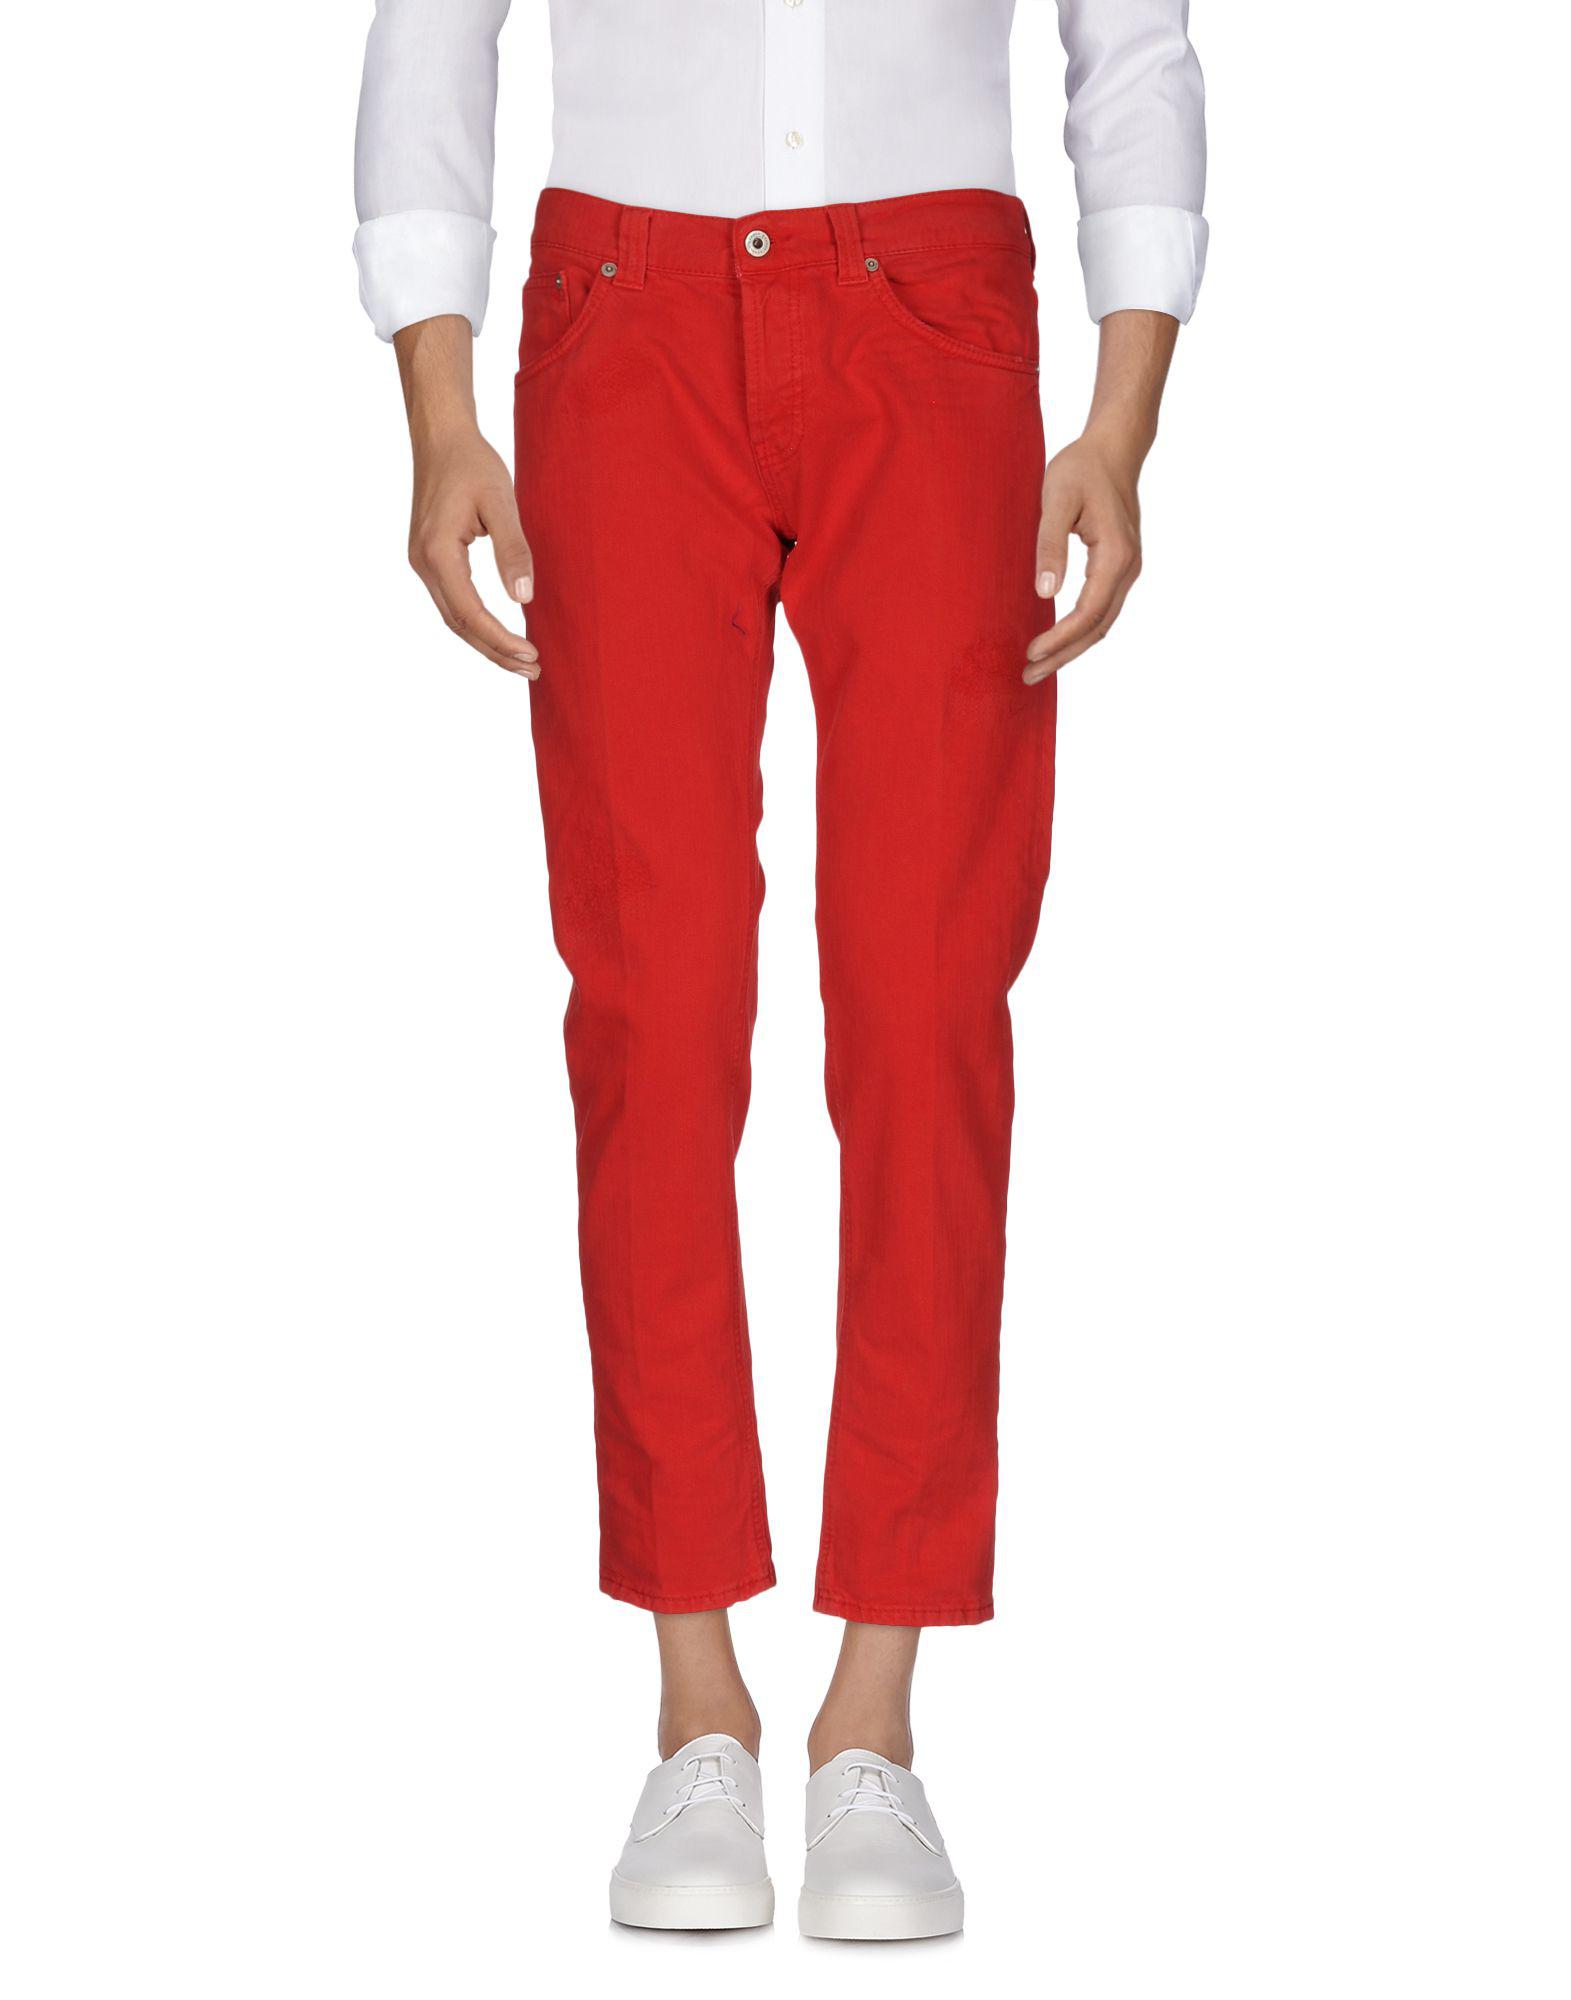 Dondup Denim Trousers in Red for Men - Save 36% - Lyst